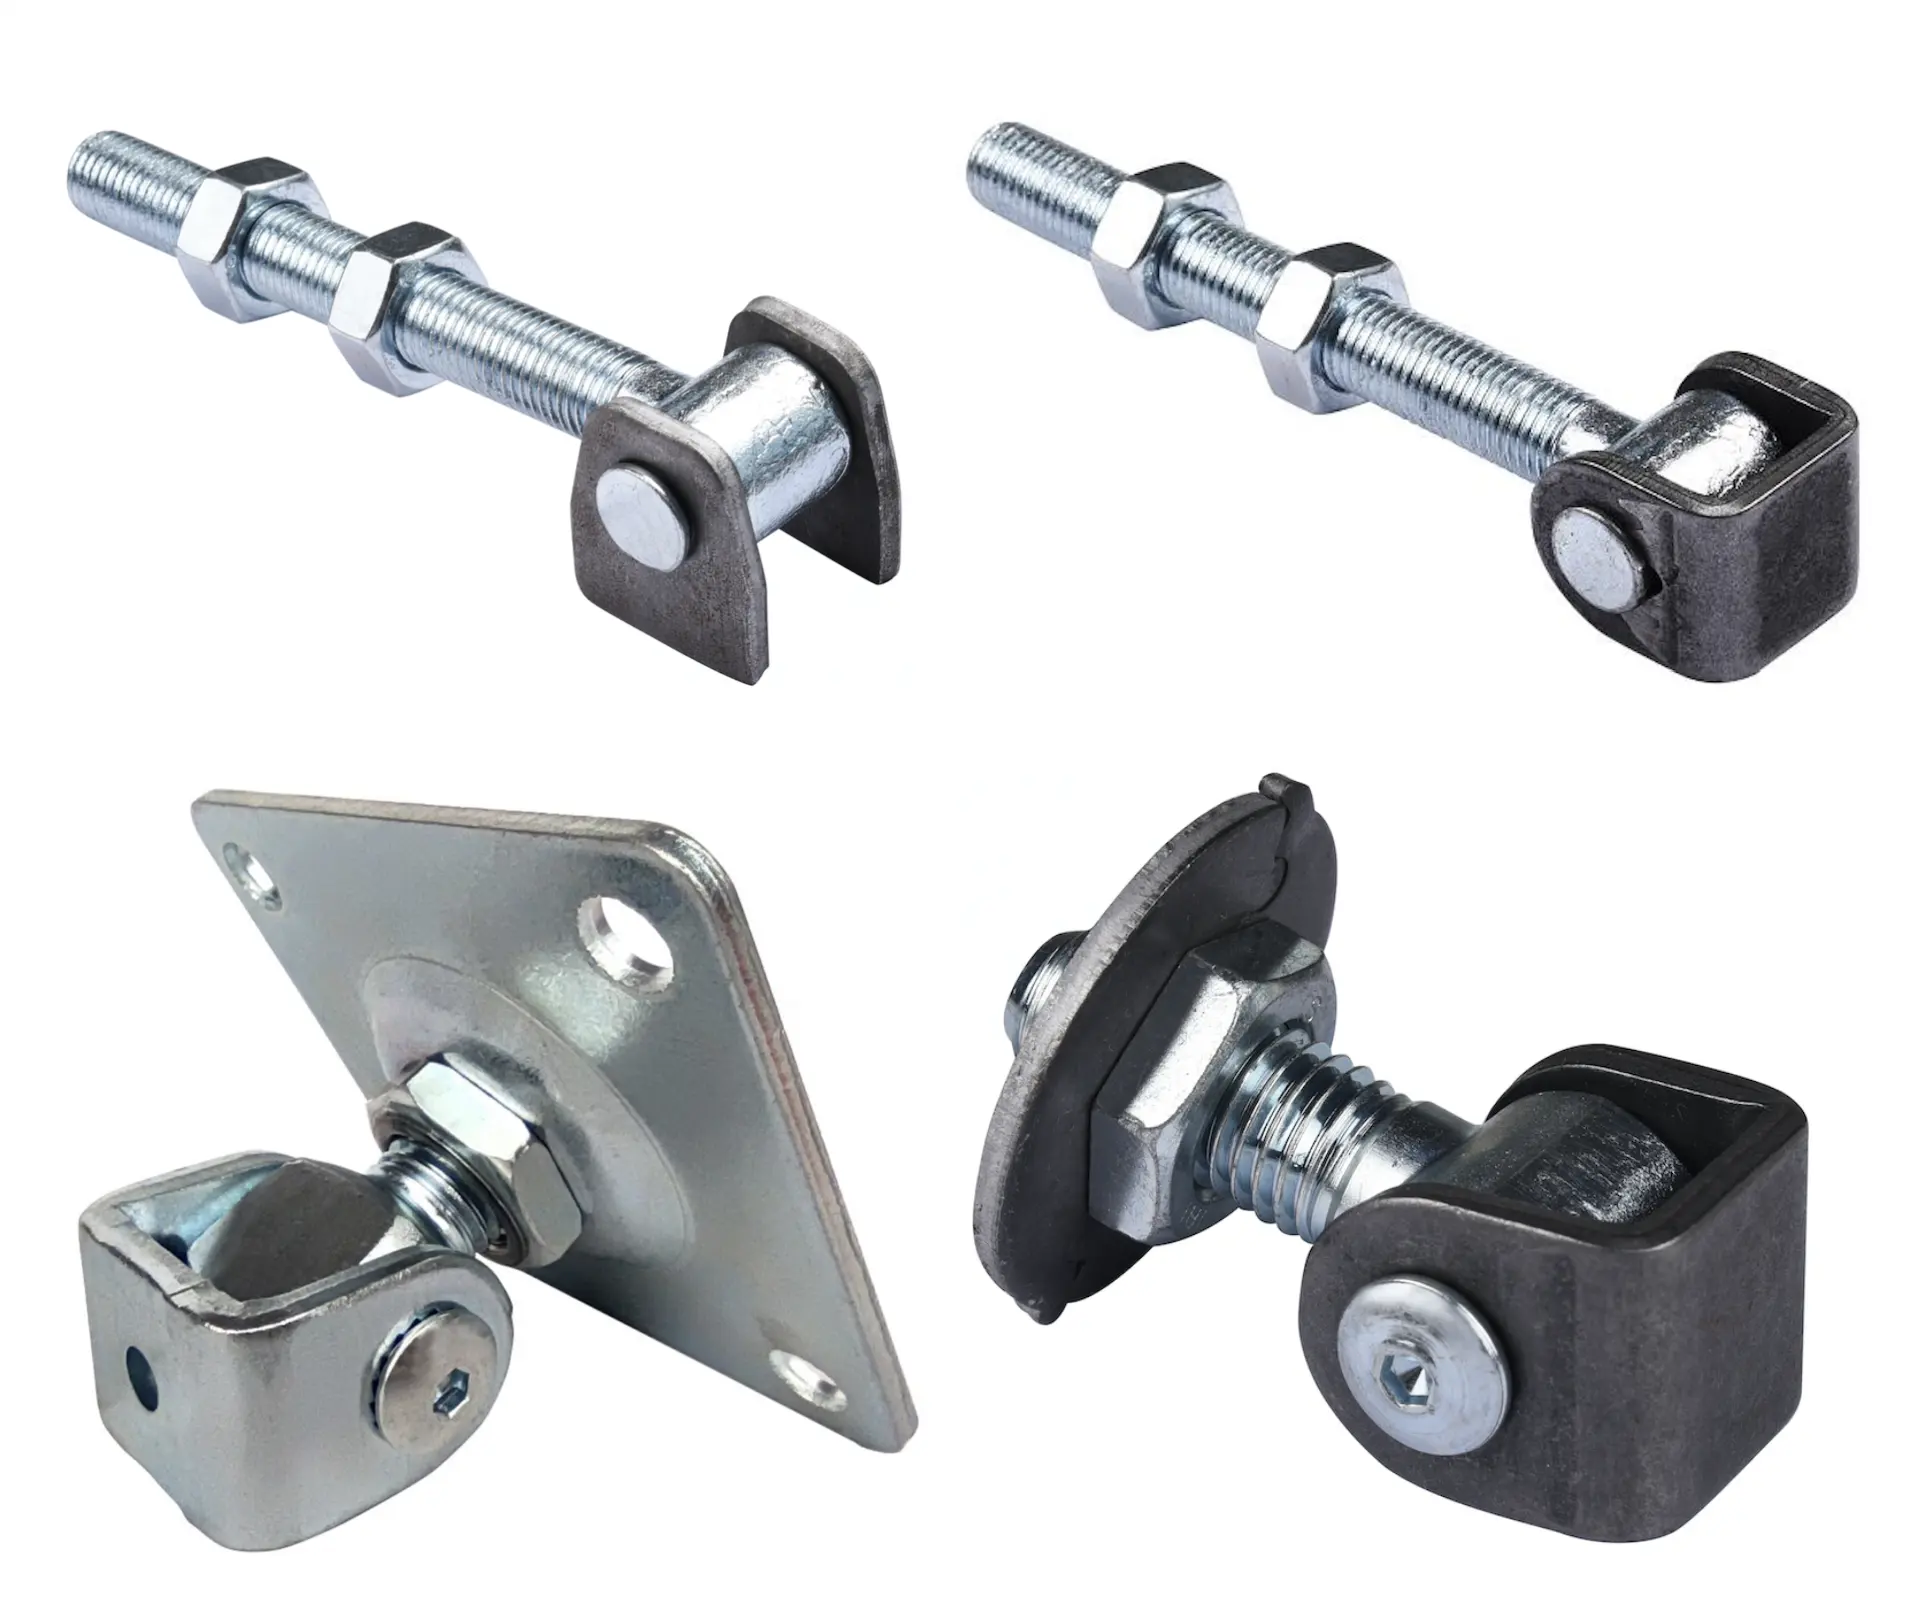 Zinc plated swing gate adjustable Hinge with long bolt and nut